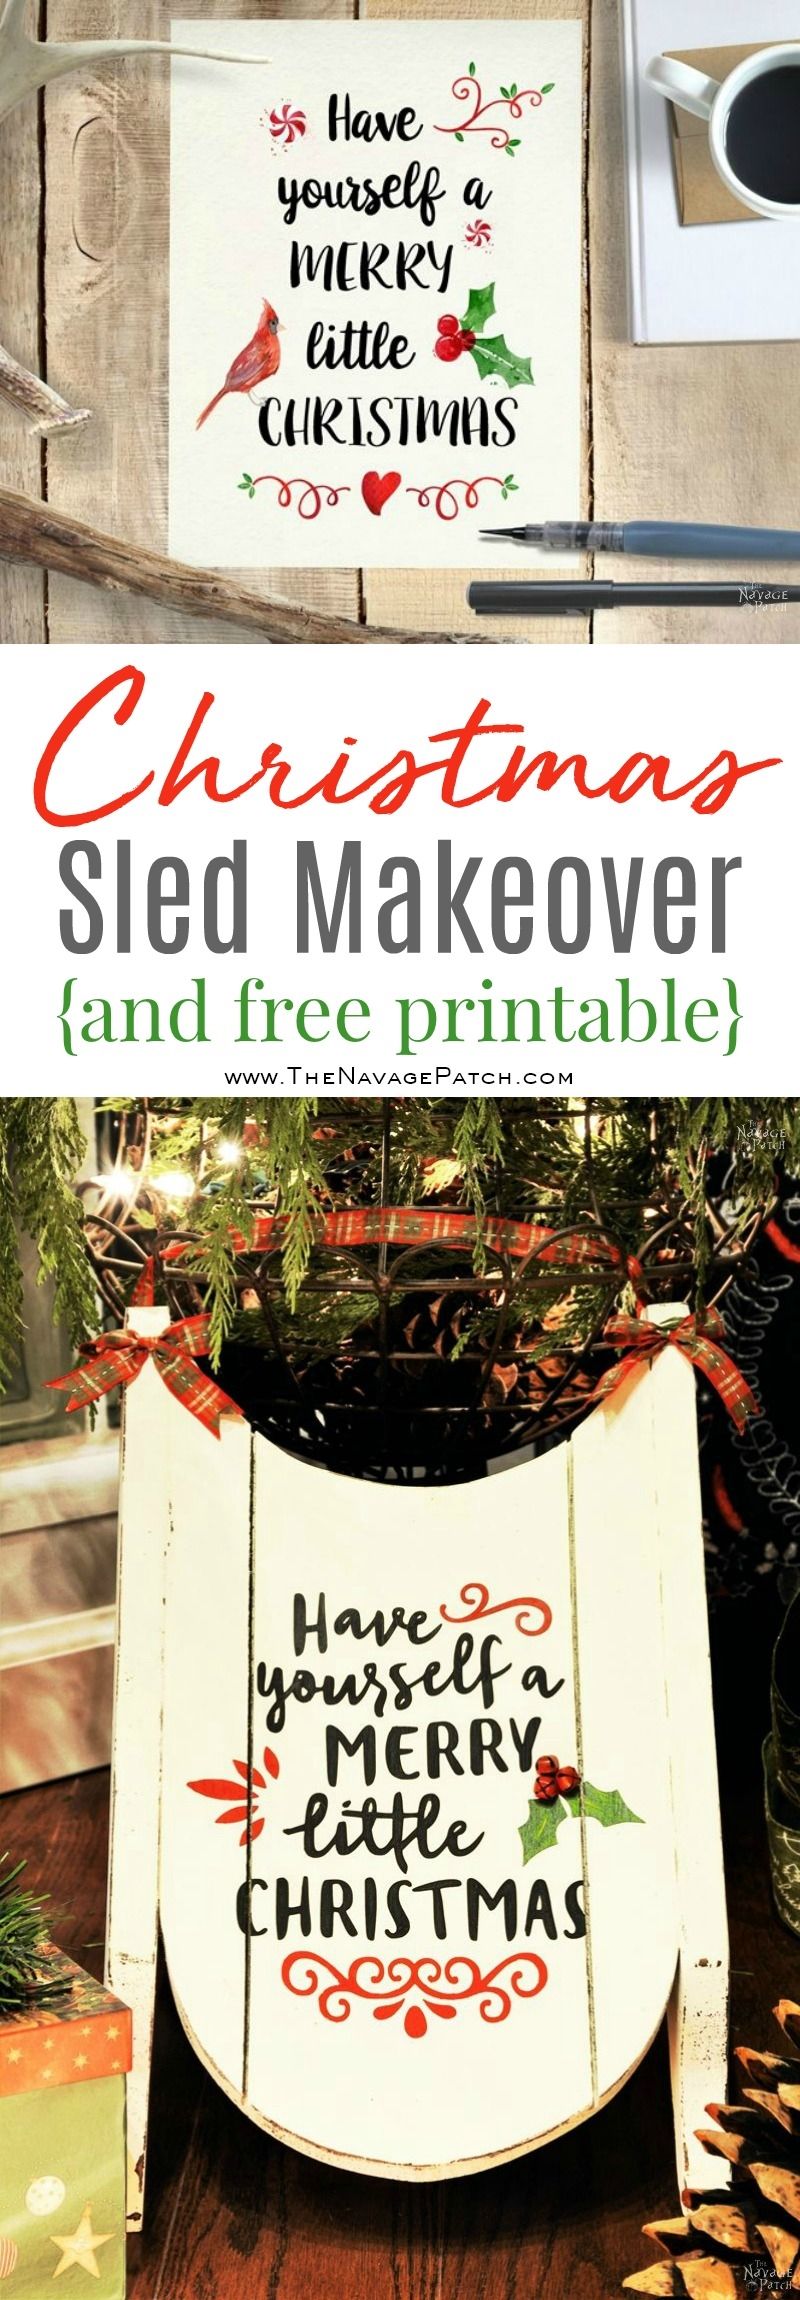 Merry Little Sled | Diy Christmas decoration | Free Christmas Printable | Sled makeover | Diy chalk paint | Homemade chalk paint recipe | How to stencil | Stenciled home decor | Festive home decor | Cheap & easy crafts | #painted and #stenciled #diy #Christmas #crafts, #freeprintable | TheNavagePatch.com